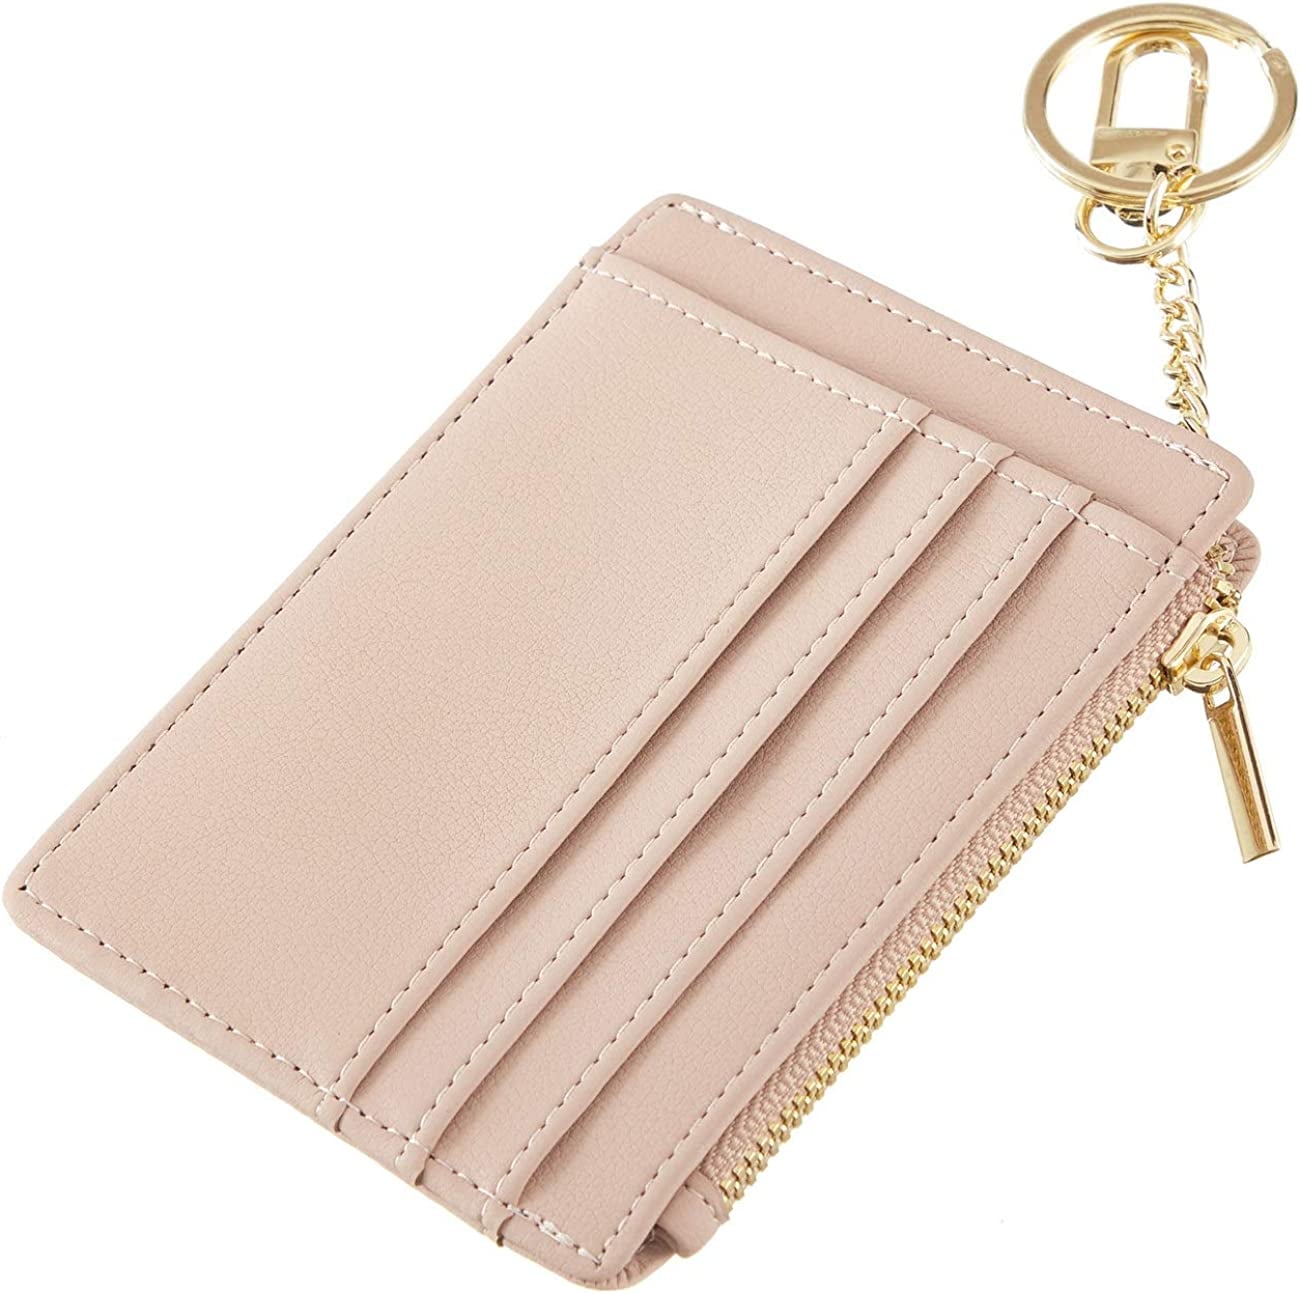 BEST QUALITY SMALL AND HANDY WALLET/CARD HOLDER FOR WOMEN N GIRLS  MULTIPURPOSE (MONEY,CARDS,KEYS)